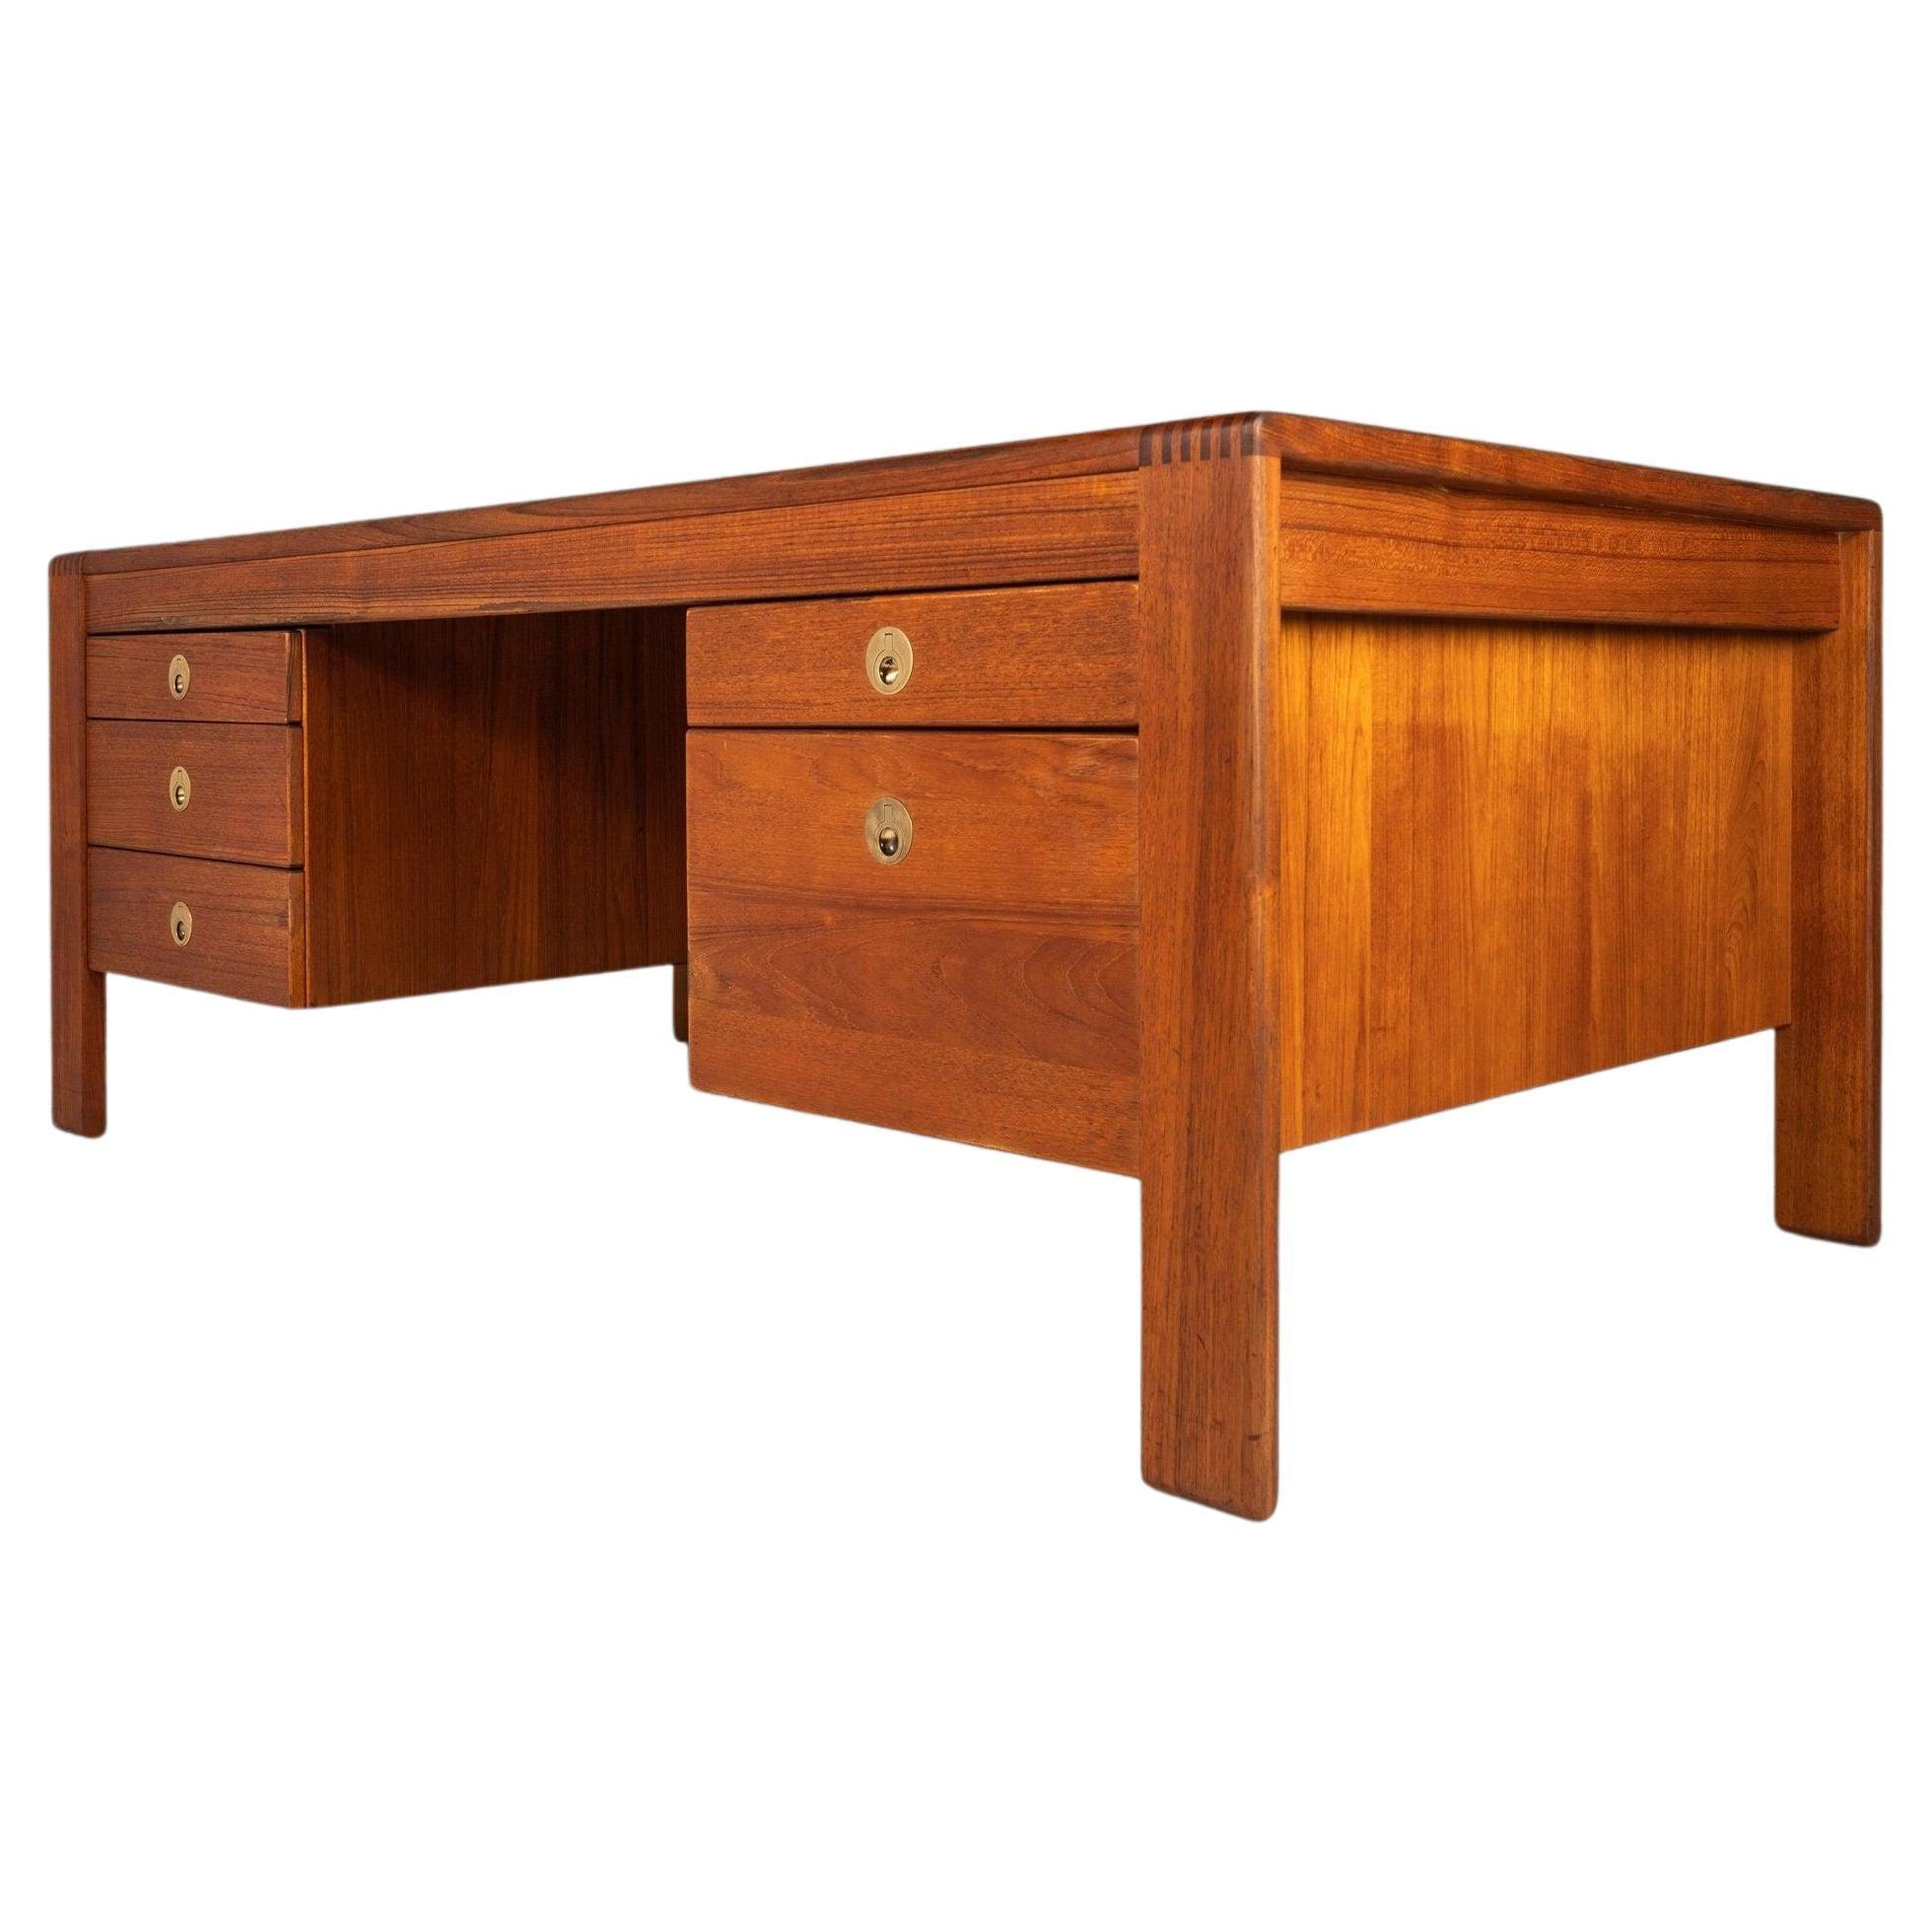 Substantial Mid-Century Modern Executive Desk by D-Scan in Teak, c. 1970's